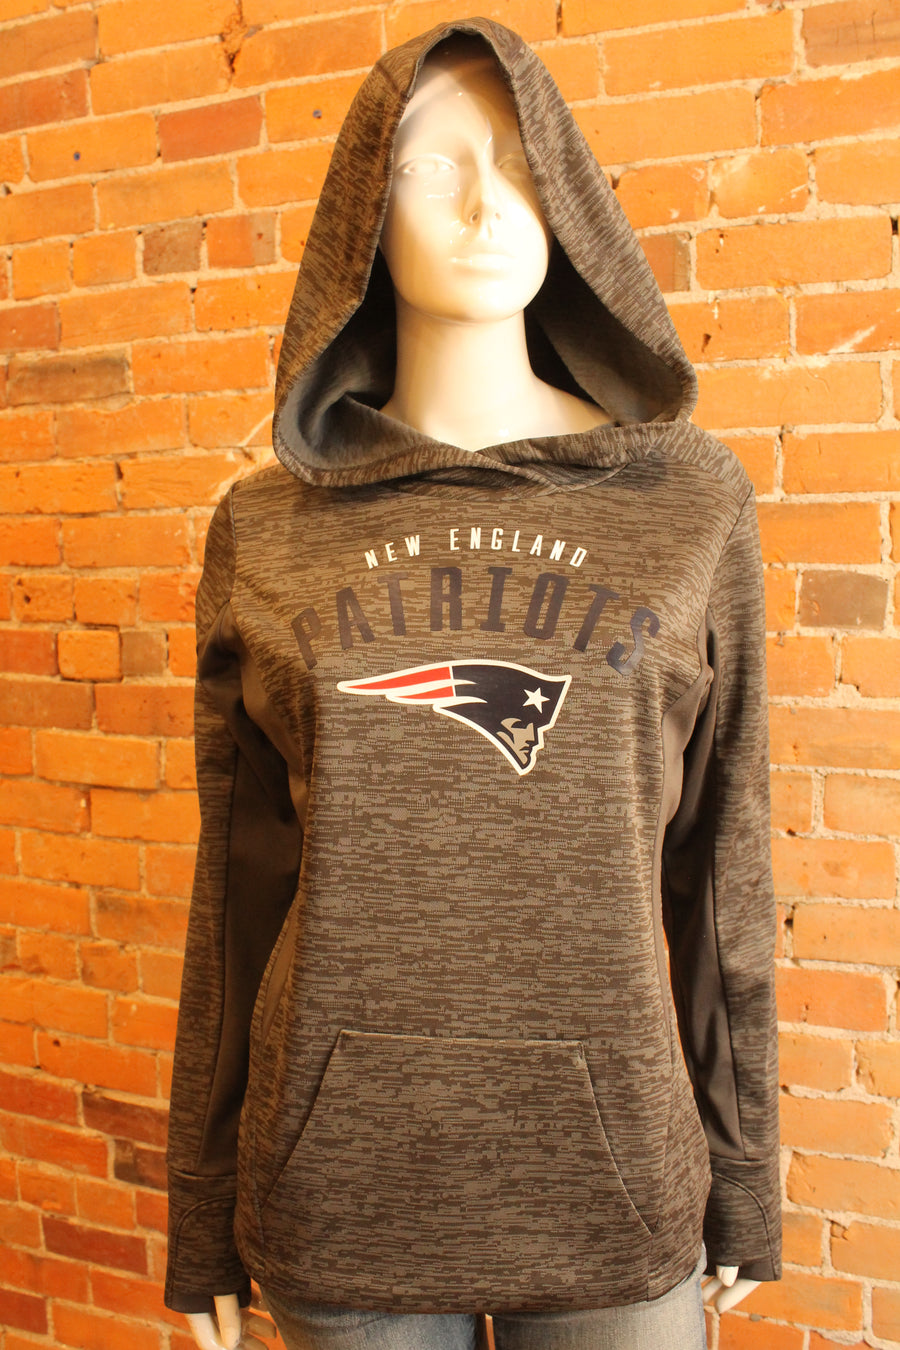 NFL New England Patriots Womens Thermabase Hoodie - online only